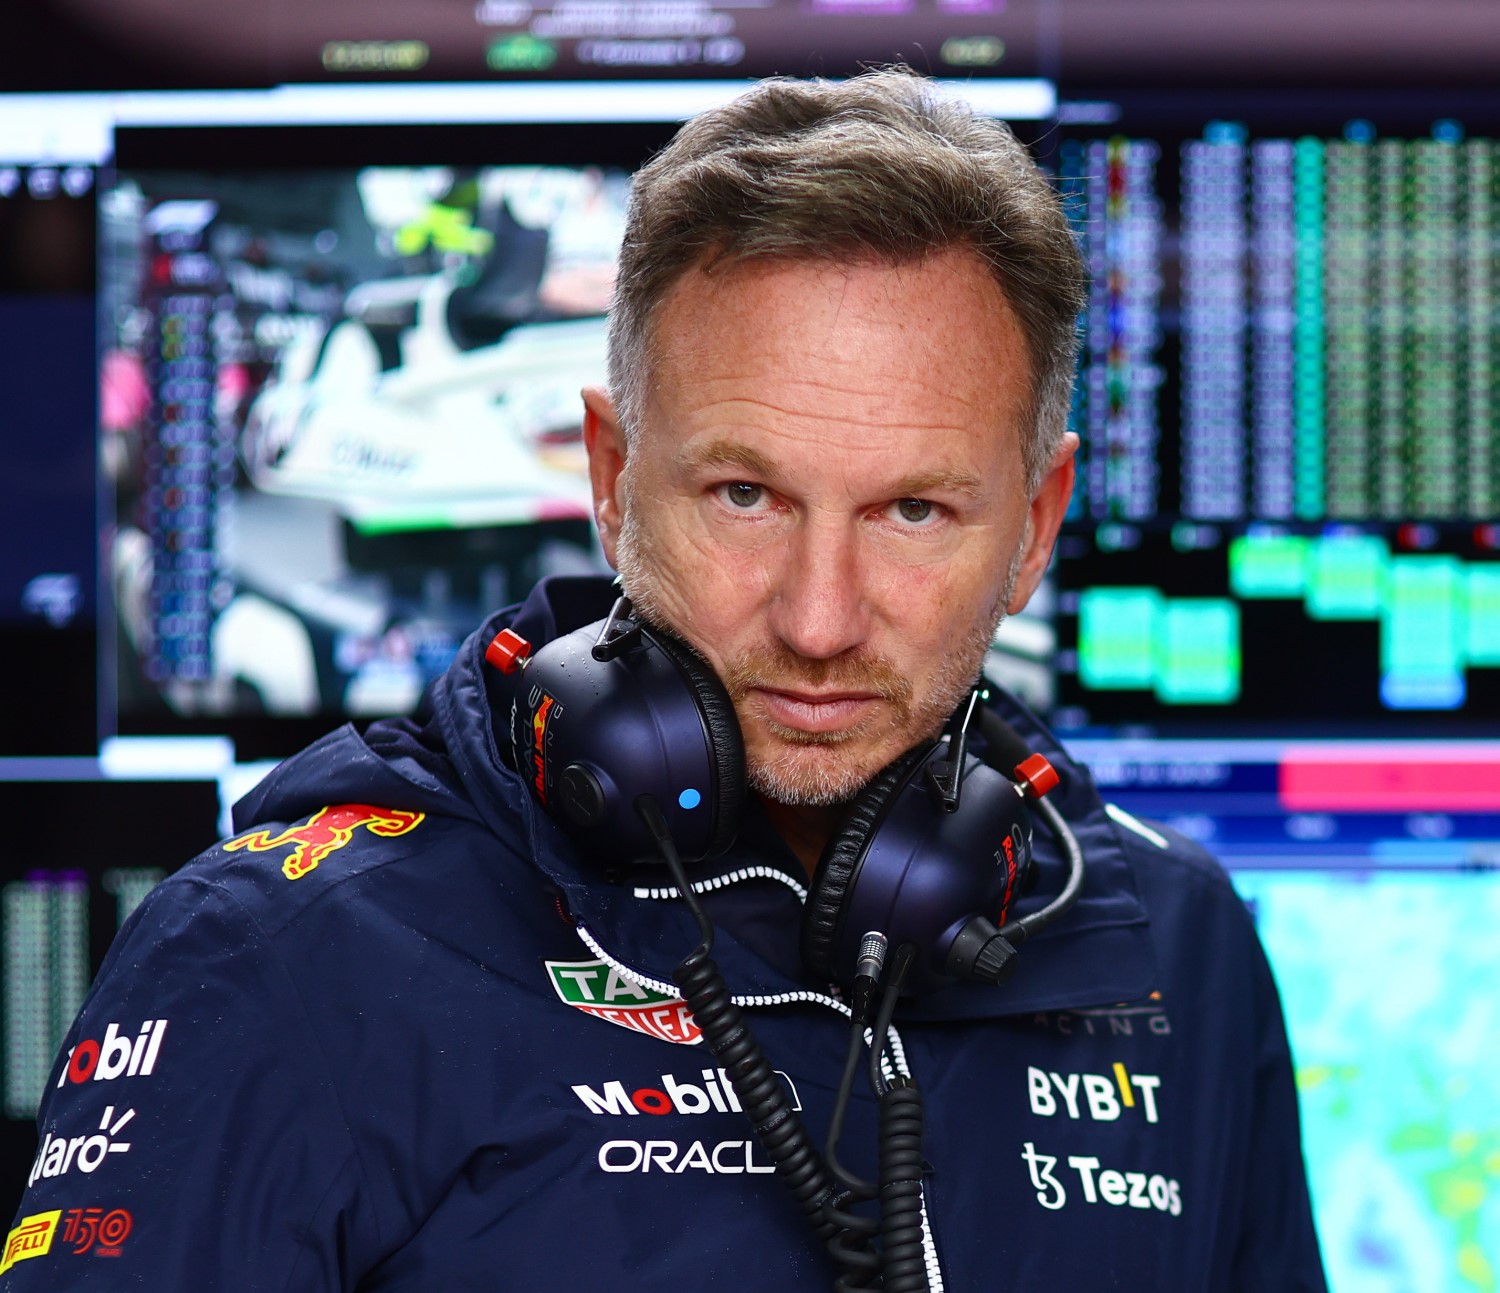 F1 cost cap: How Red Bull broke it, their punishment, and the